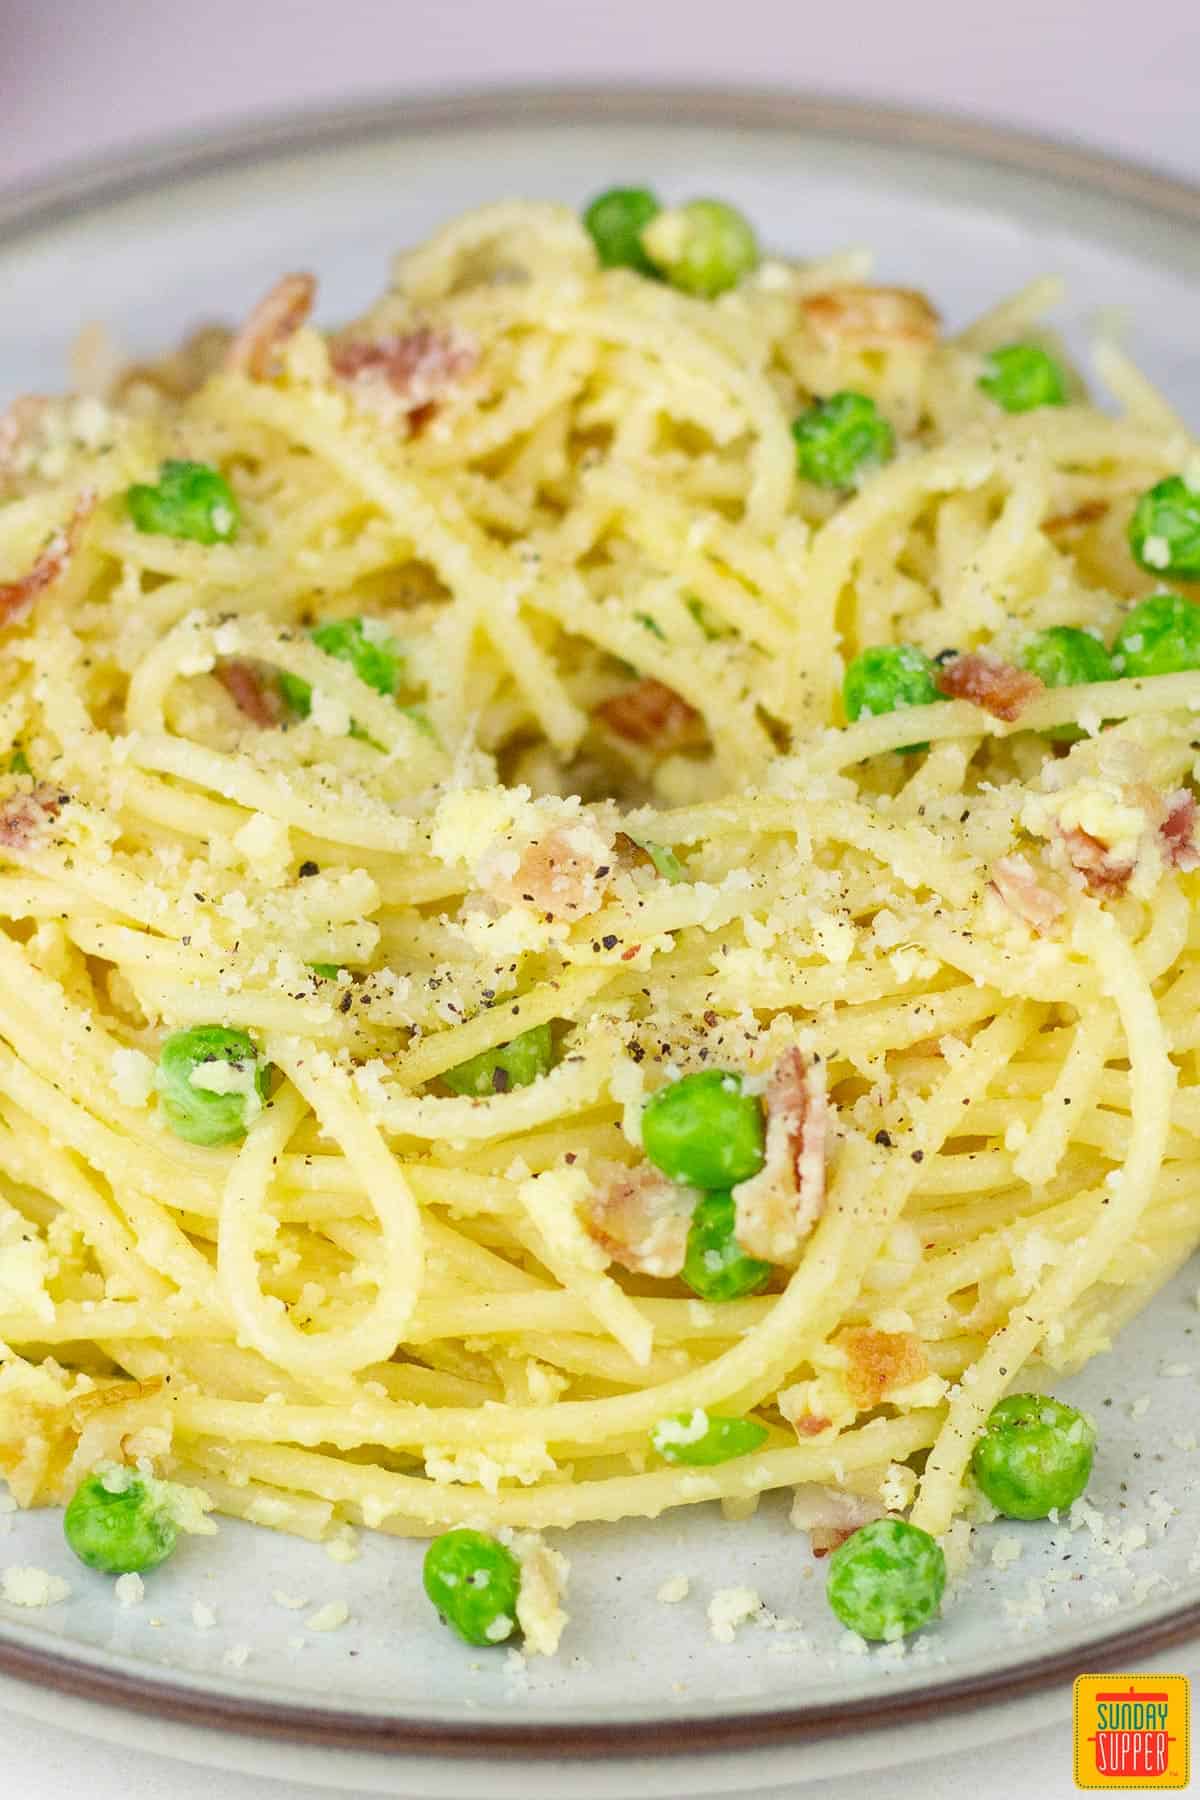 a plate filled with pasta carbonara garnished with parmesan cheese